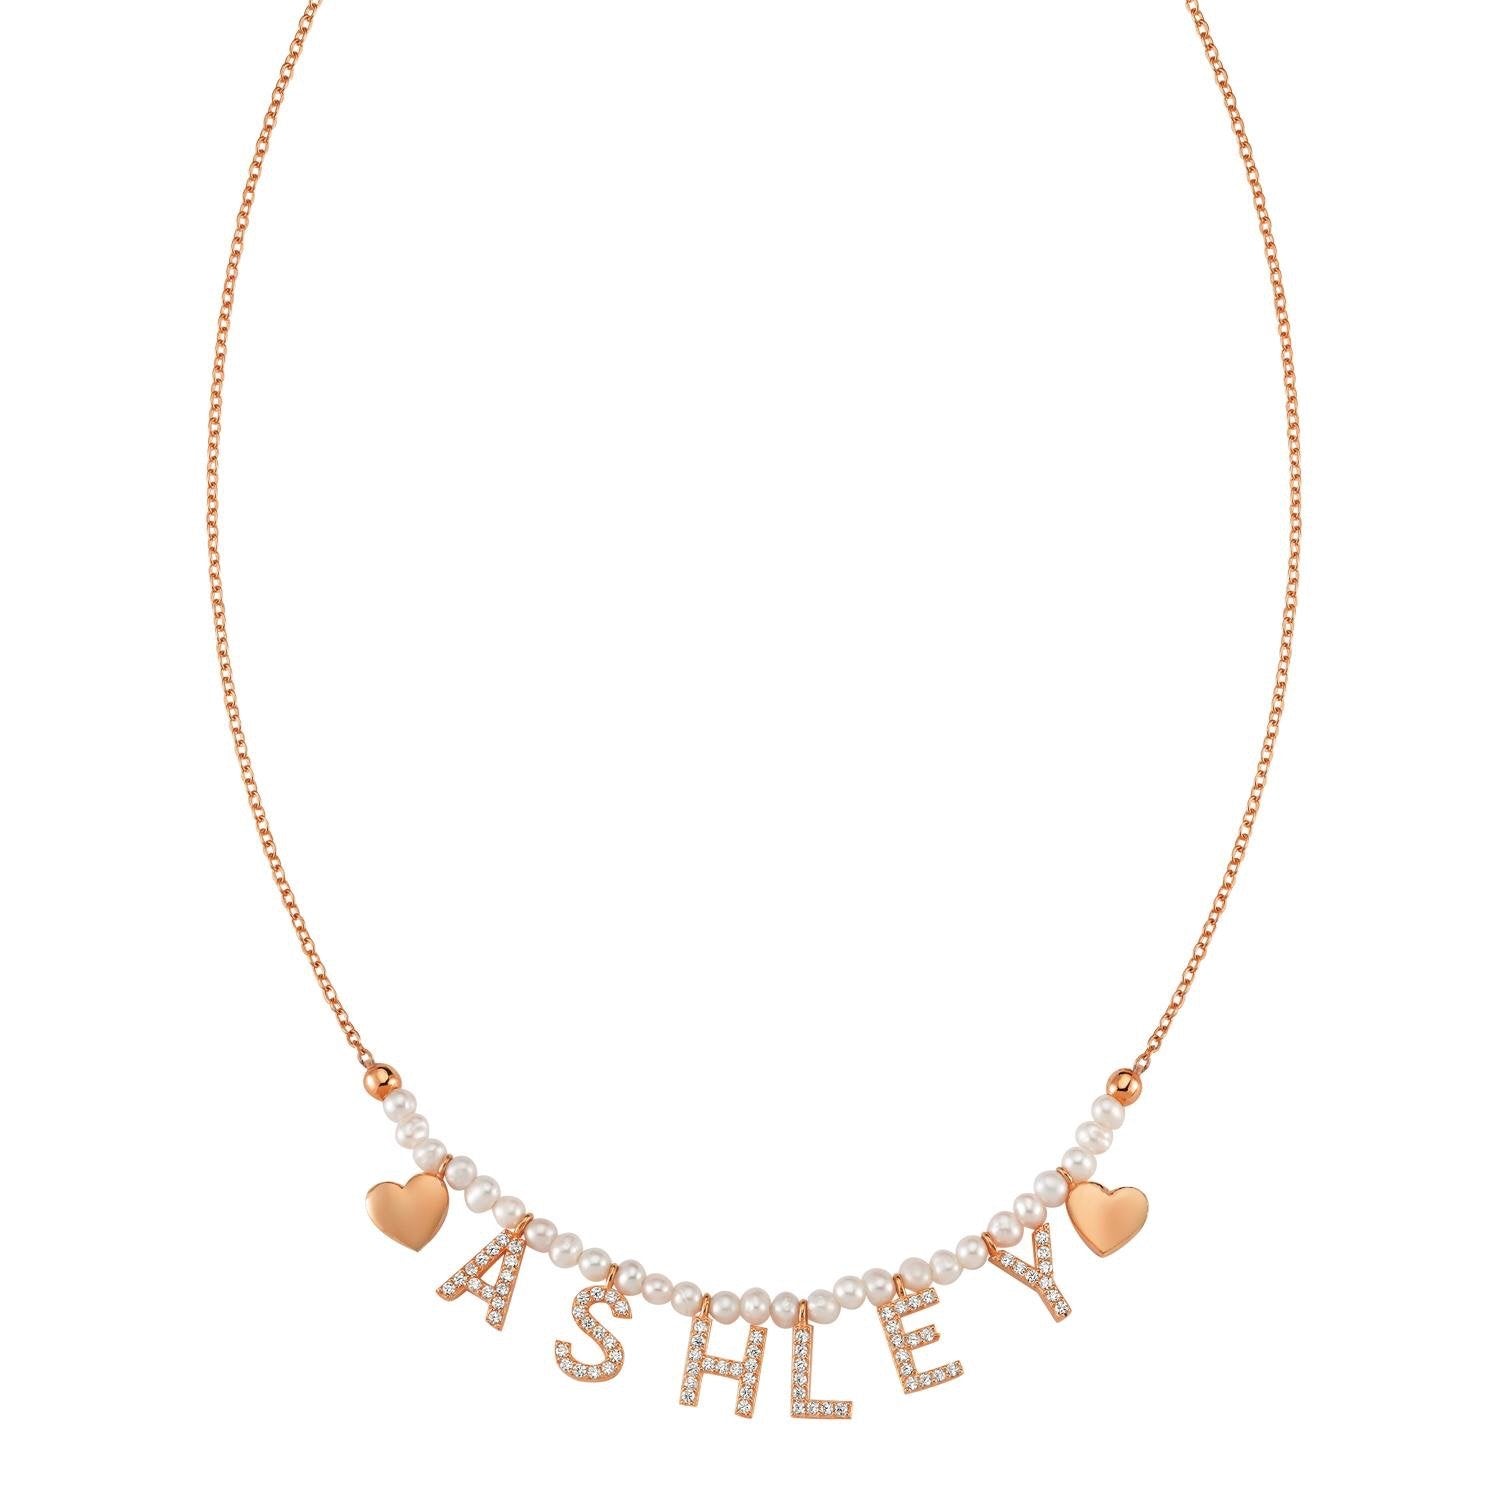 Pearl It’s All in a Name™ Necklace JEWELRY The Sis Kiss Rose Gold 